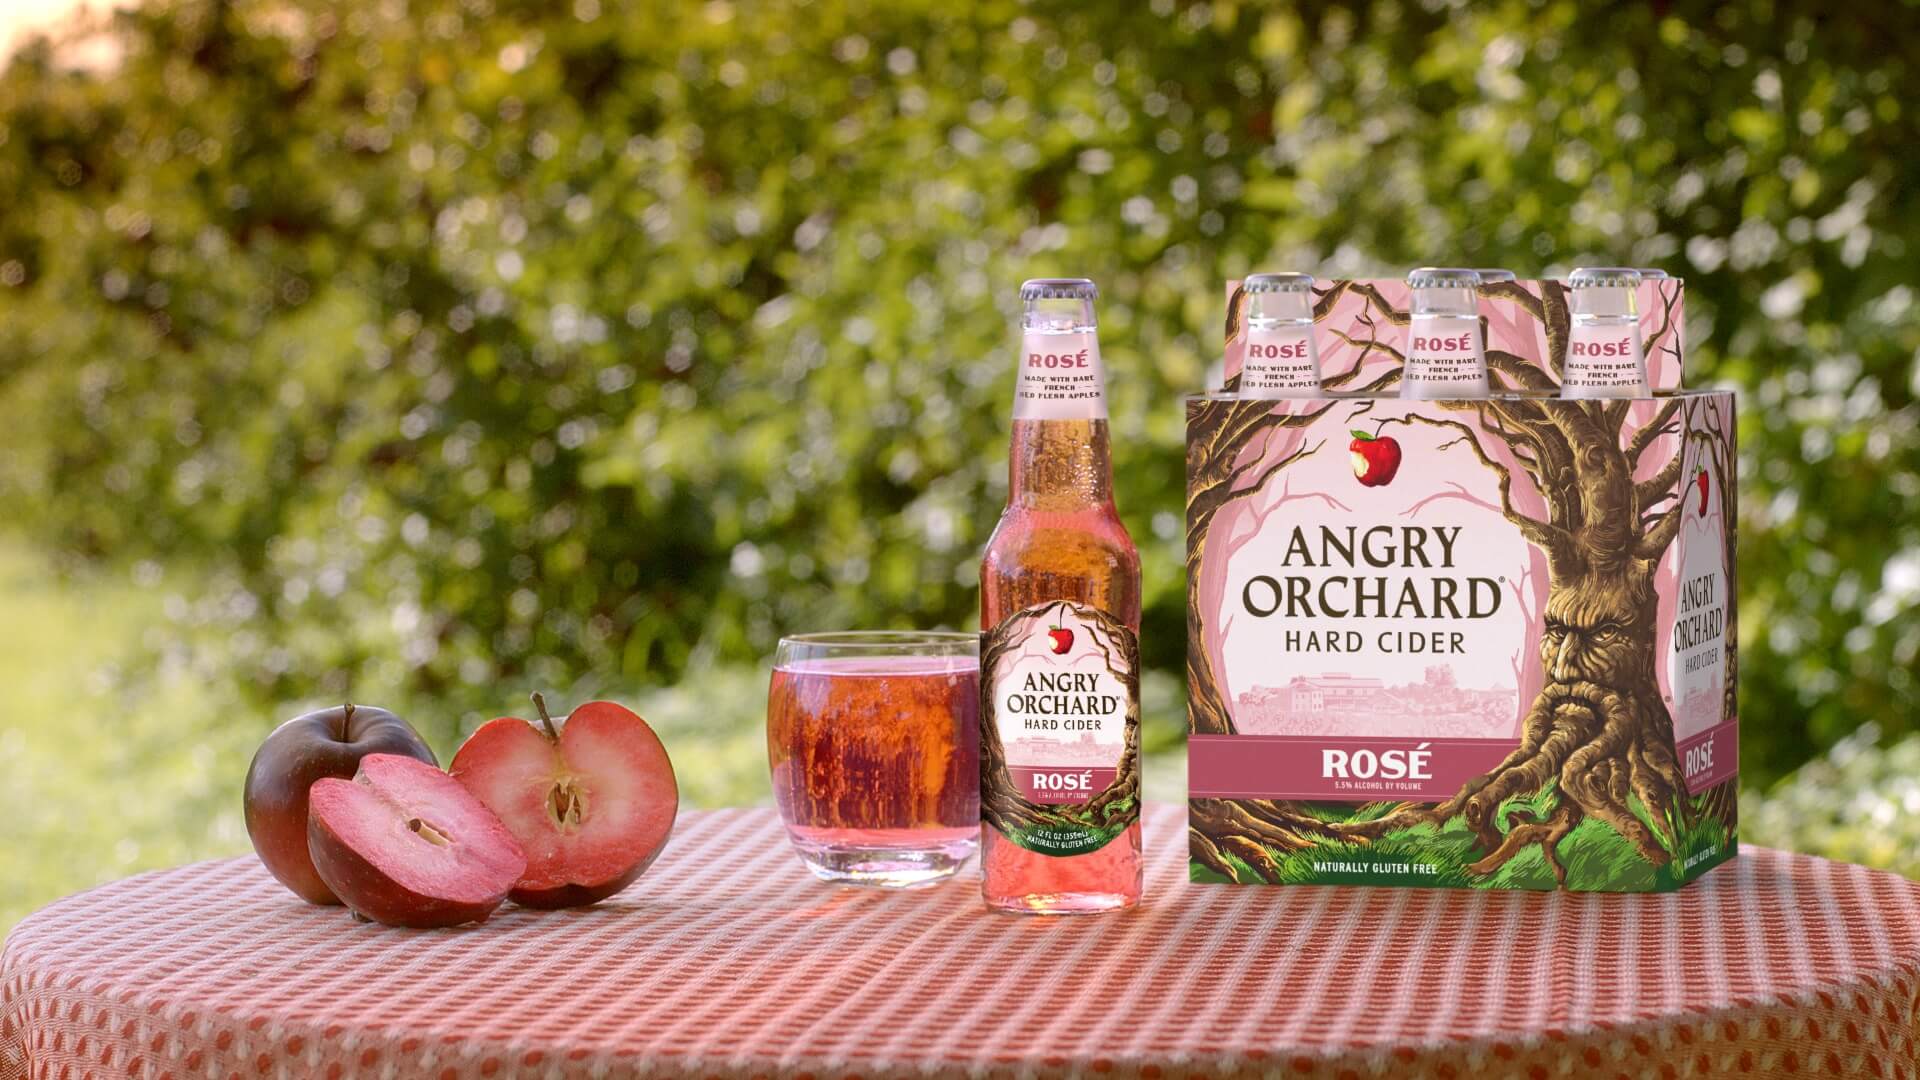 Move Over, Rosé Wine! Angry Orchard Rosé Hard Cider is Here, Poised to be the Year’s Hottest Drink